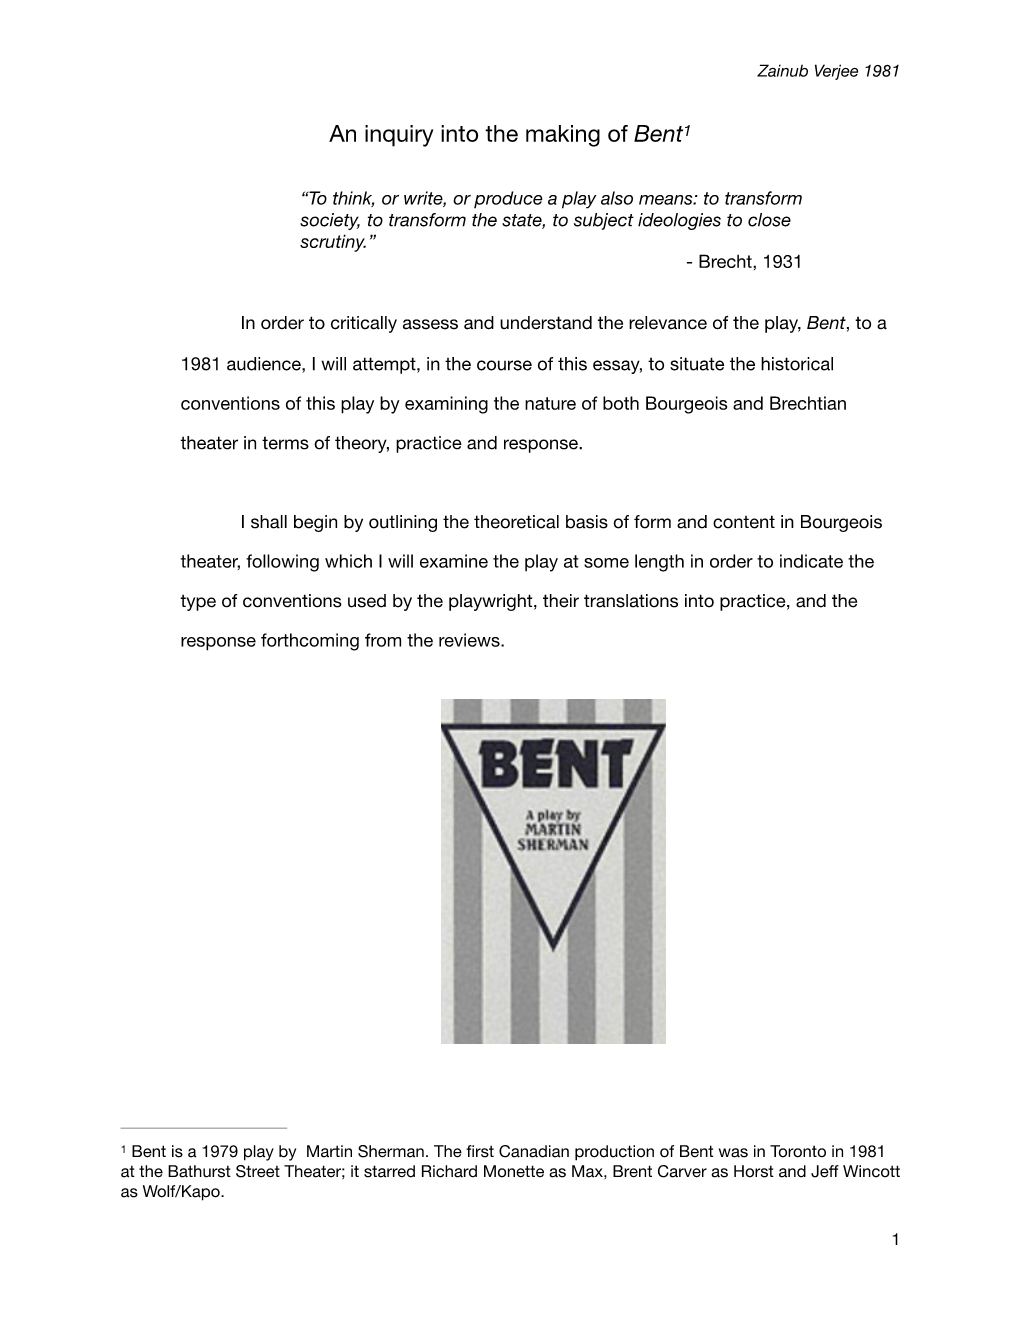 An Inquiry Into the Making of Bent1